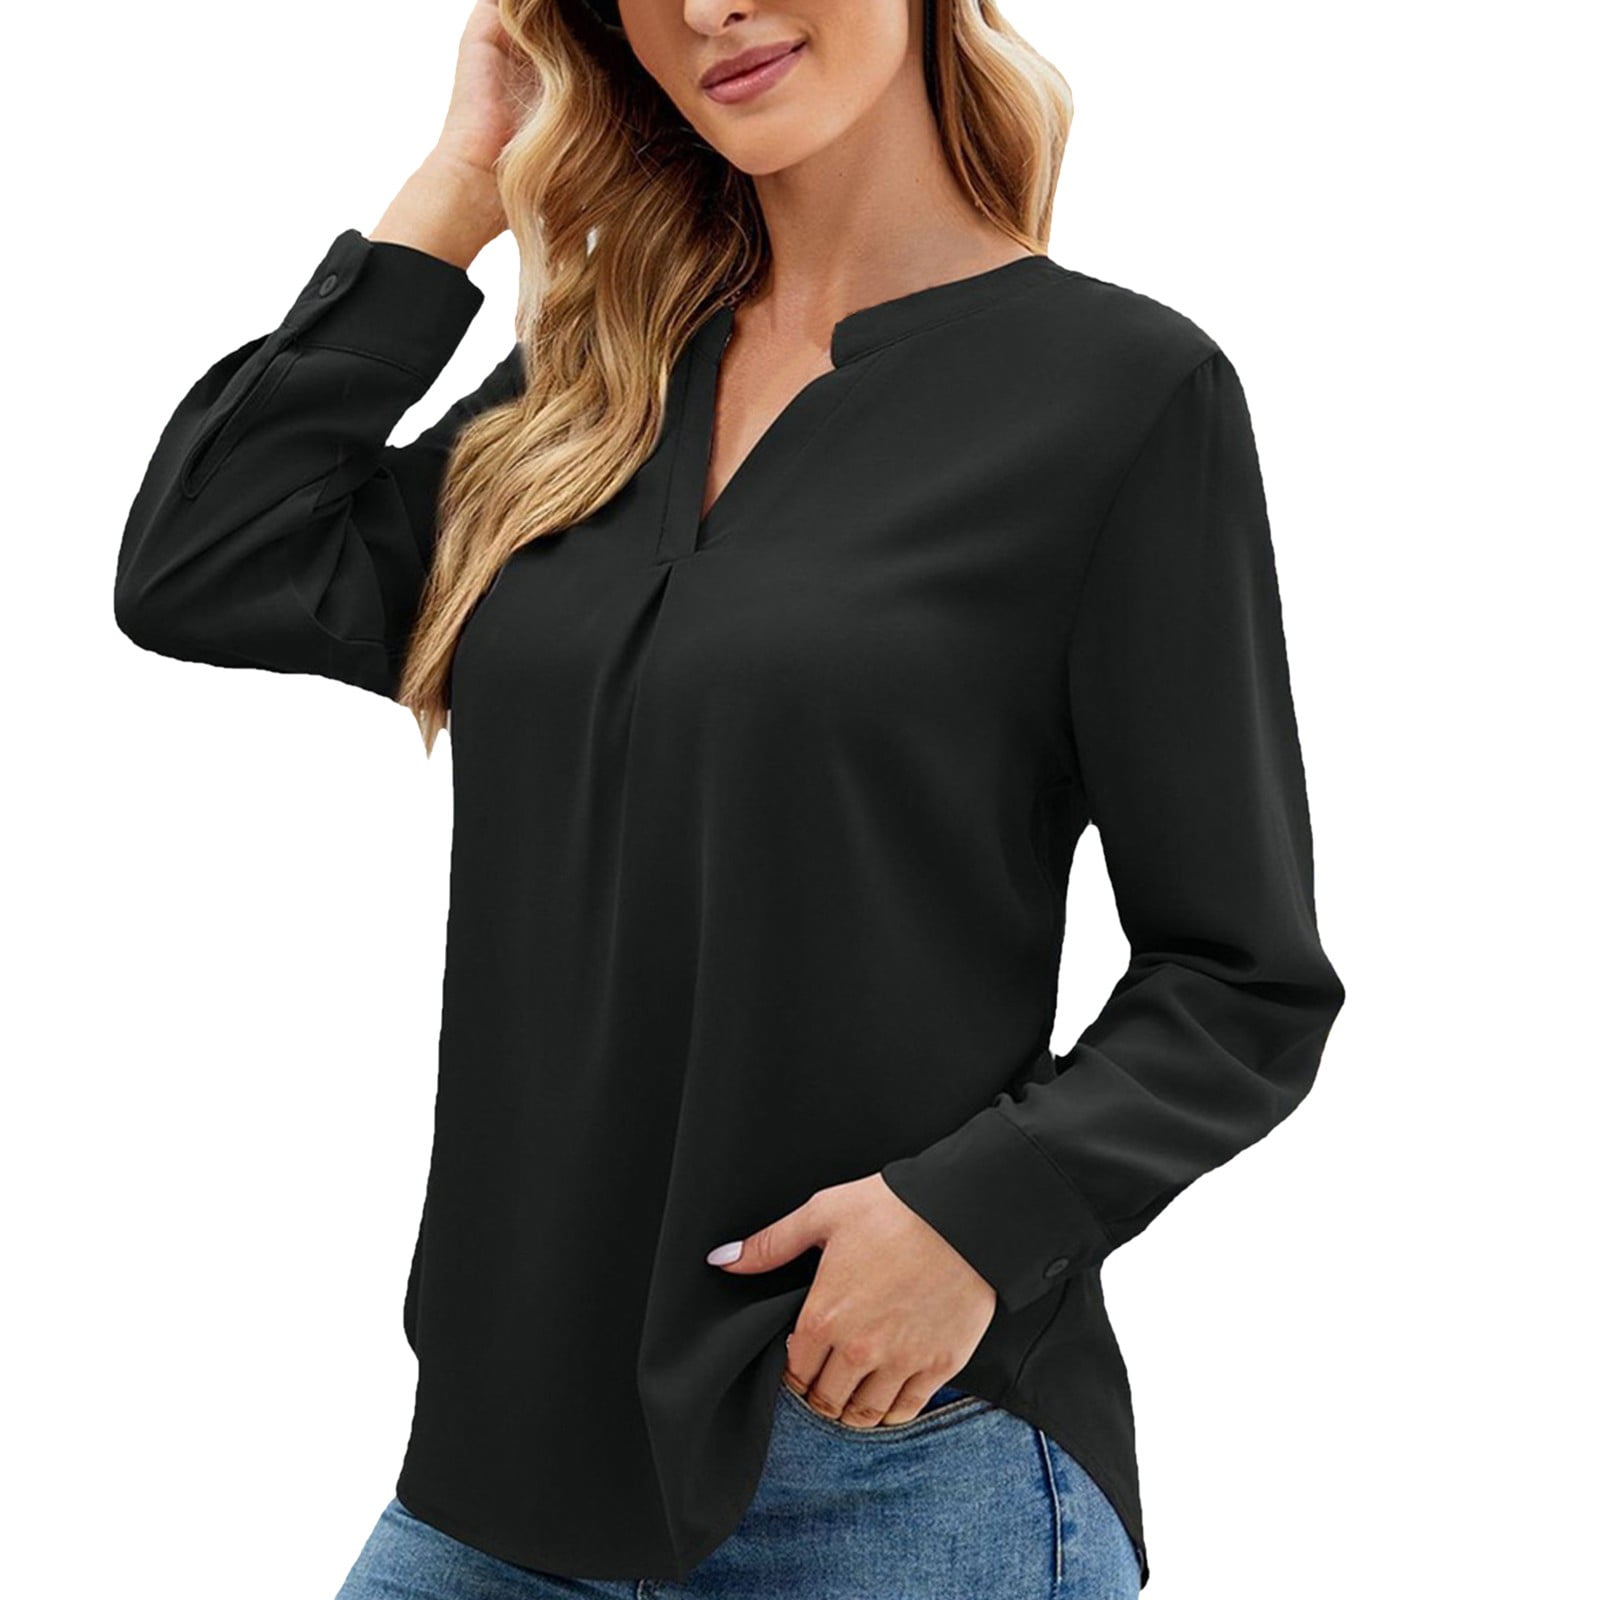 Youngnet,Women's Clothes Summer,v Neck Tops,5 Dollar Bill,80 s Outfits for  Women,1 Dollar Items for Teens,Casual Tshirt womenzipper Tops,Black  Oversized Shirt,Women Black Tunic top, at  Women's Clothing store